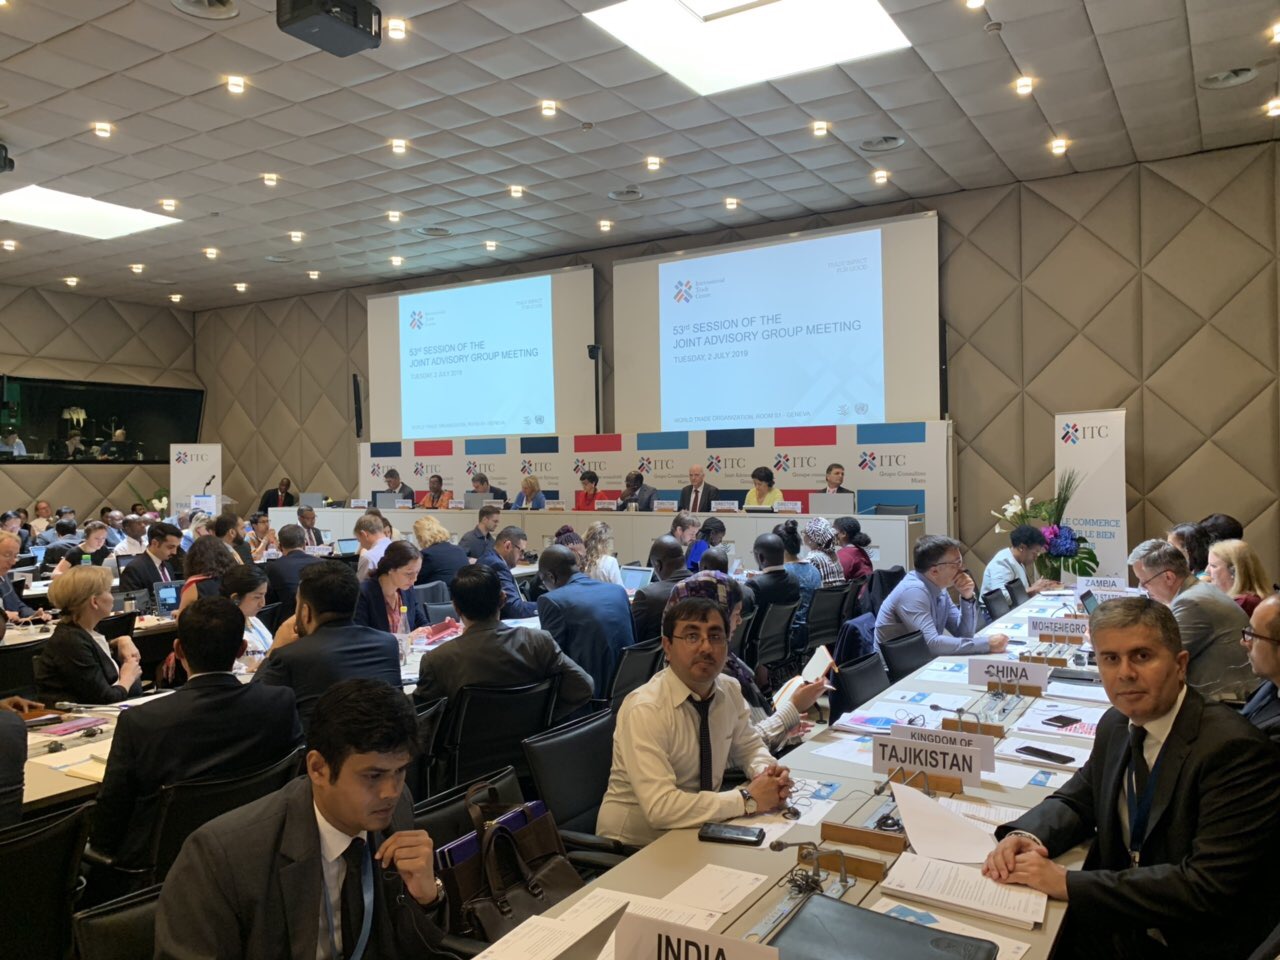 Introduction of the Republic of Tajikistan’s trade sector achievements in the 53rd annual session of the Joint Advisory Group of International Trade Centre  